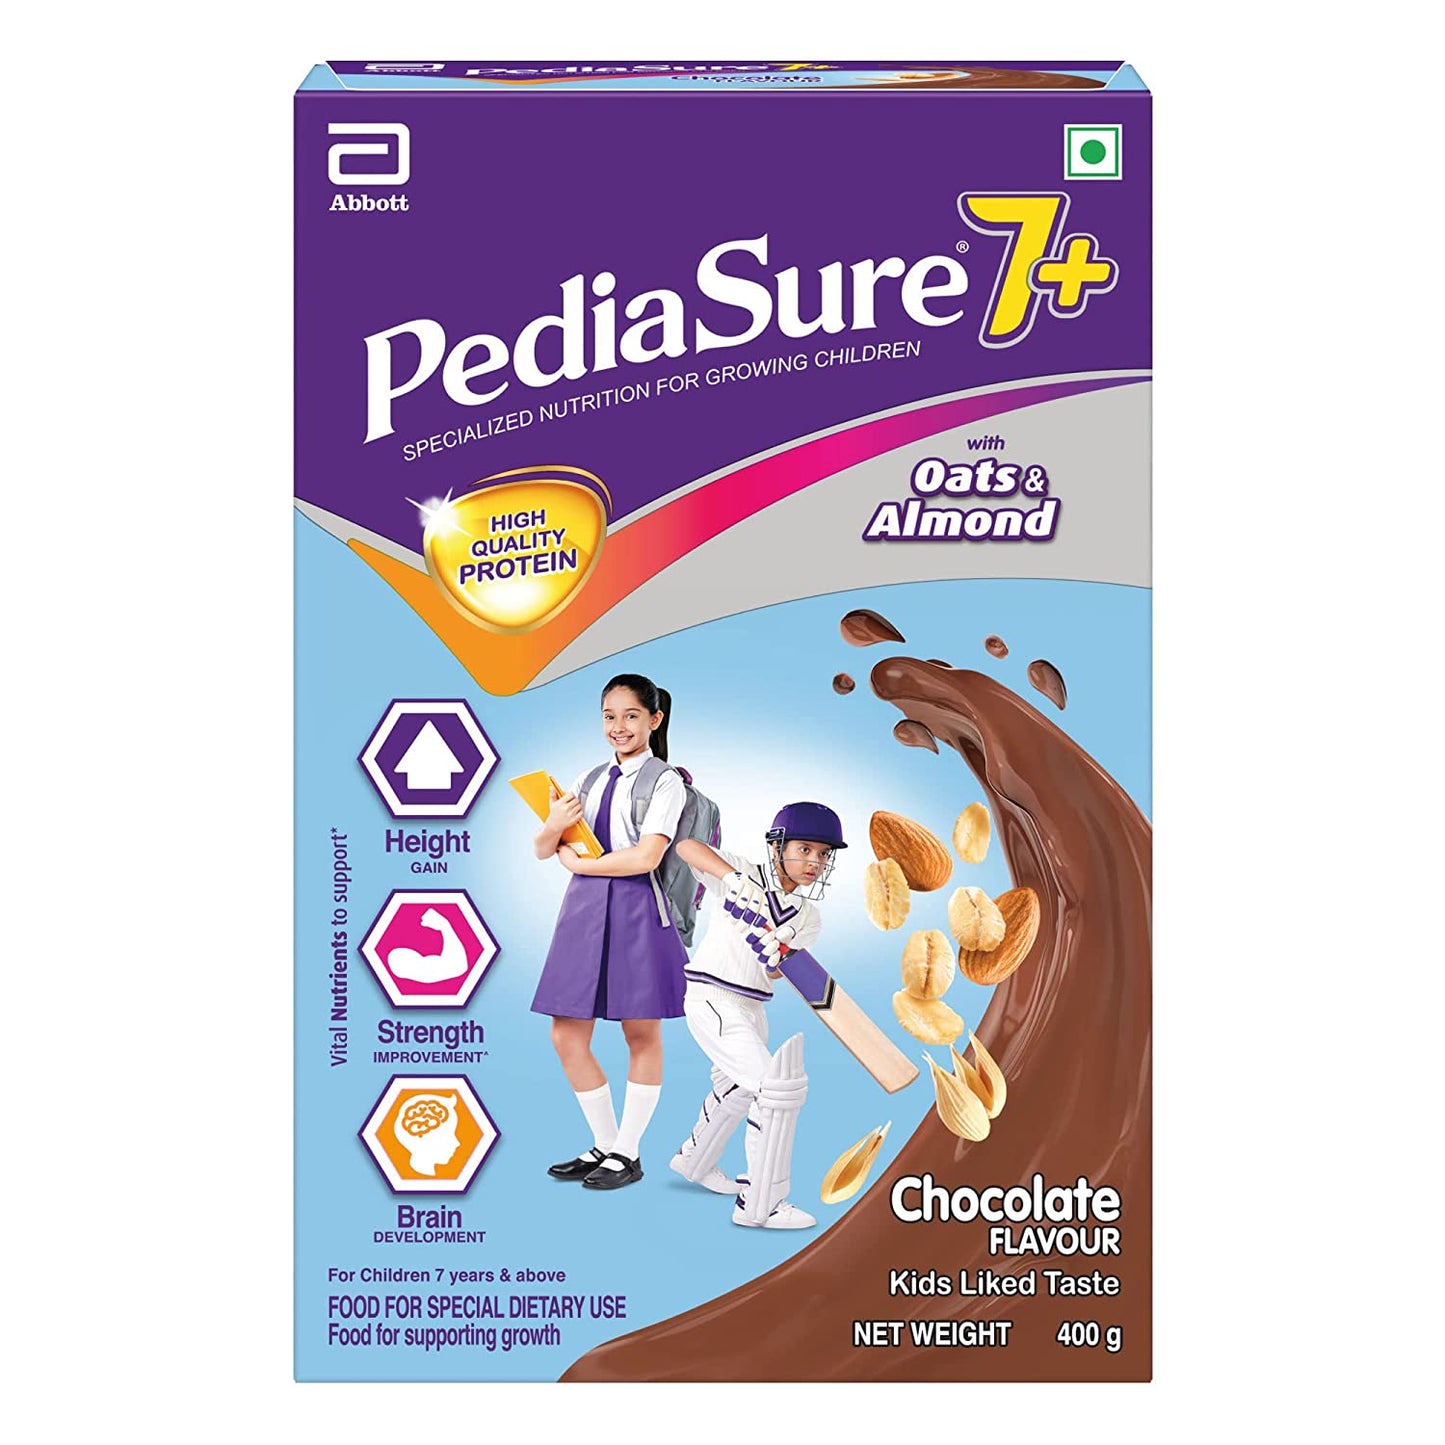 Pediasure 7+ Specialized Chocolate Nutrition Drink - Refill Pack for Complete Balanced Nutrition, Height Gain, Muscle Strength & Brain Development in Growing Children - 400gm